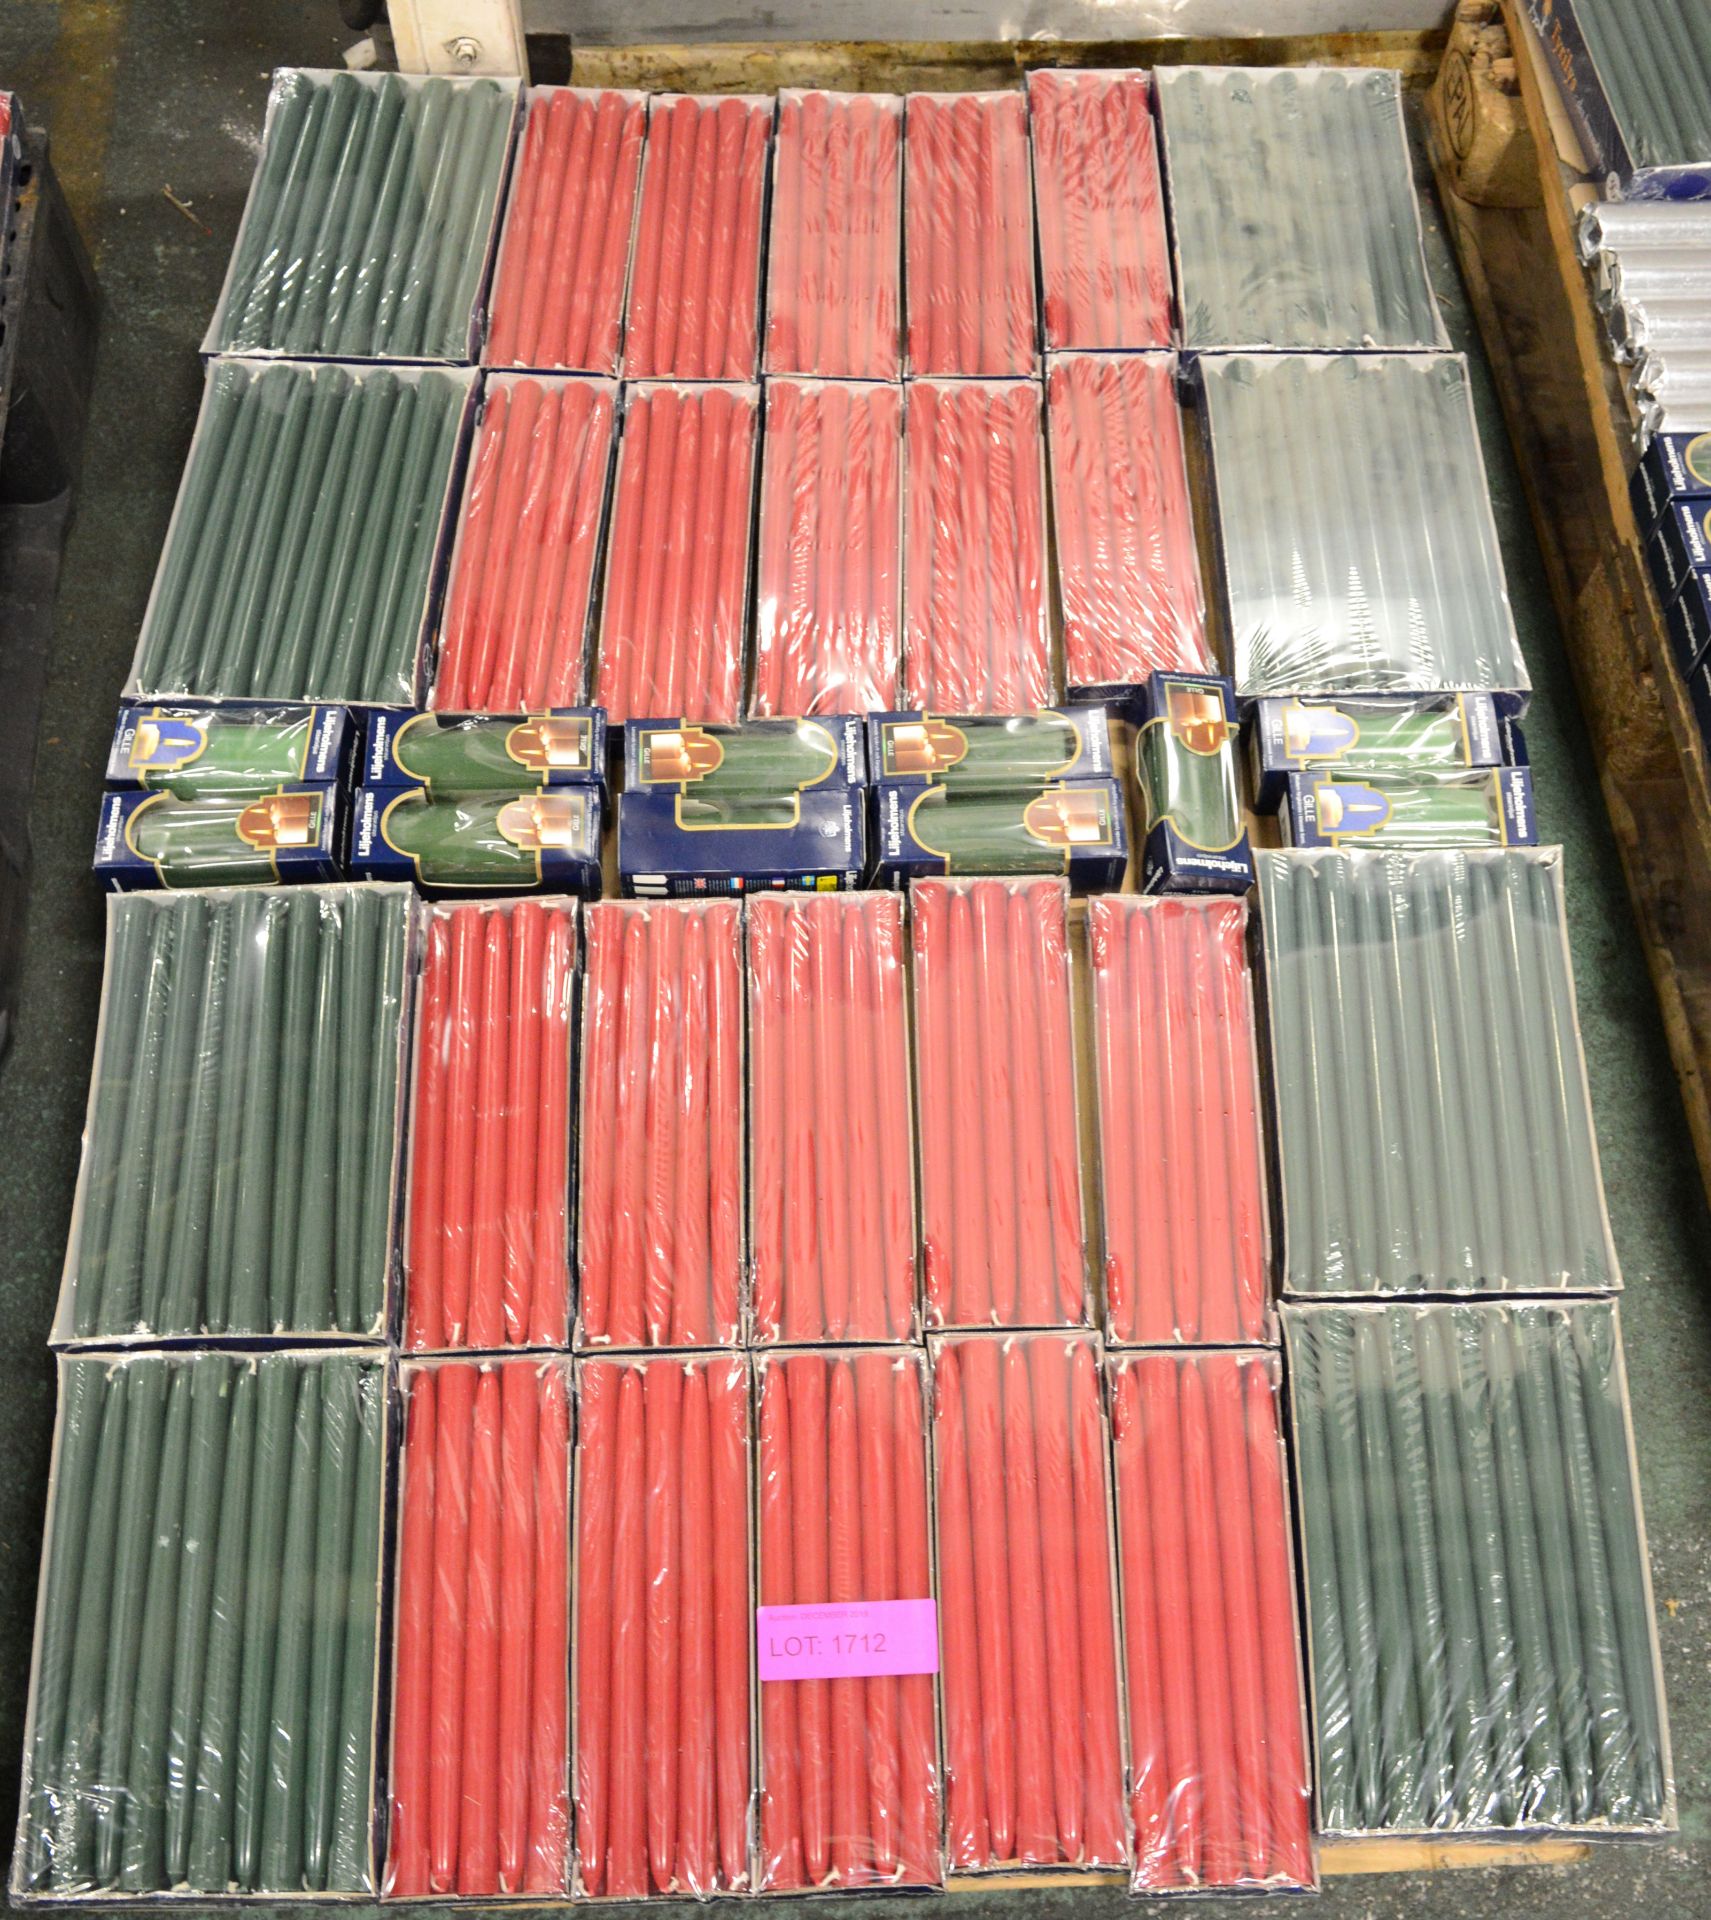 Pallet of Assorted Candles - See photo for quantity.